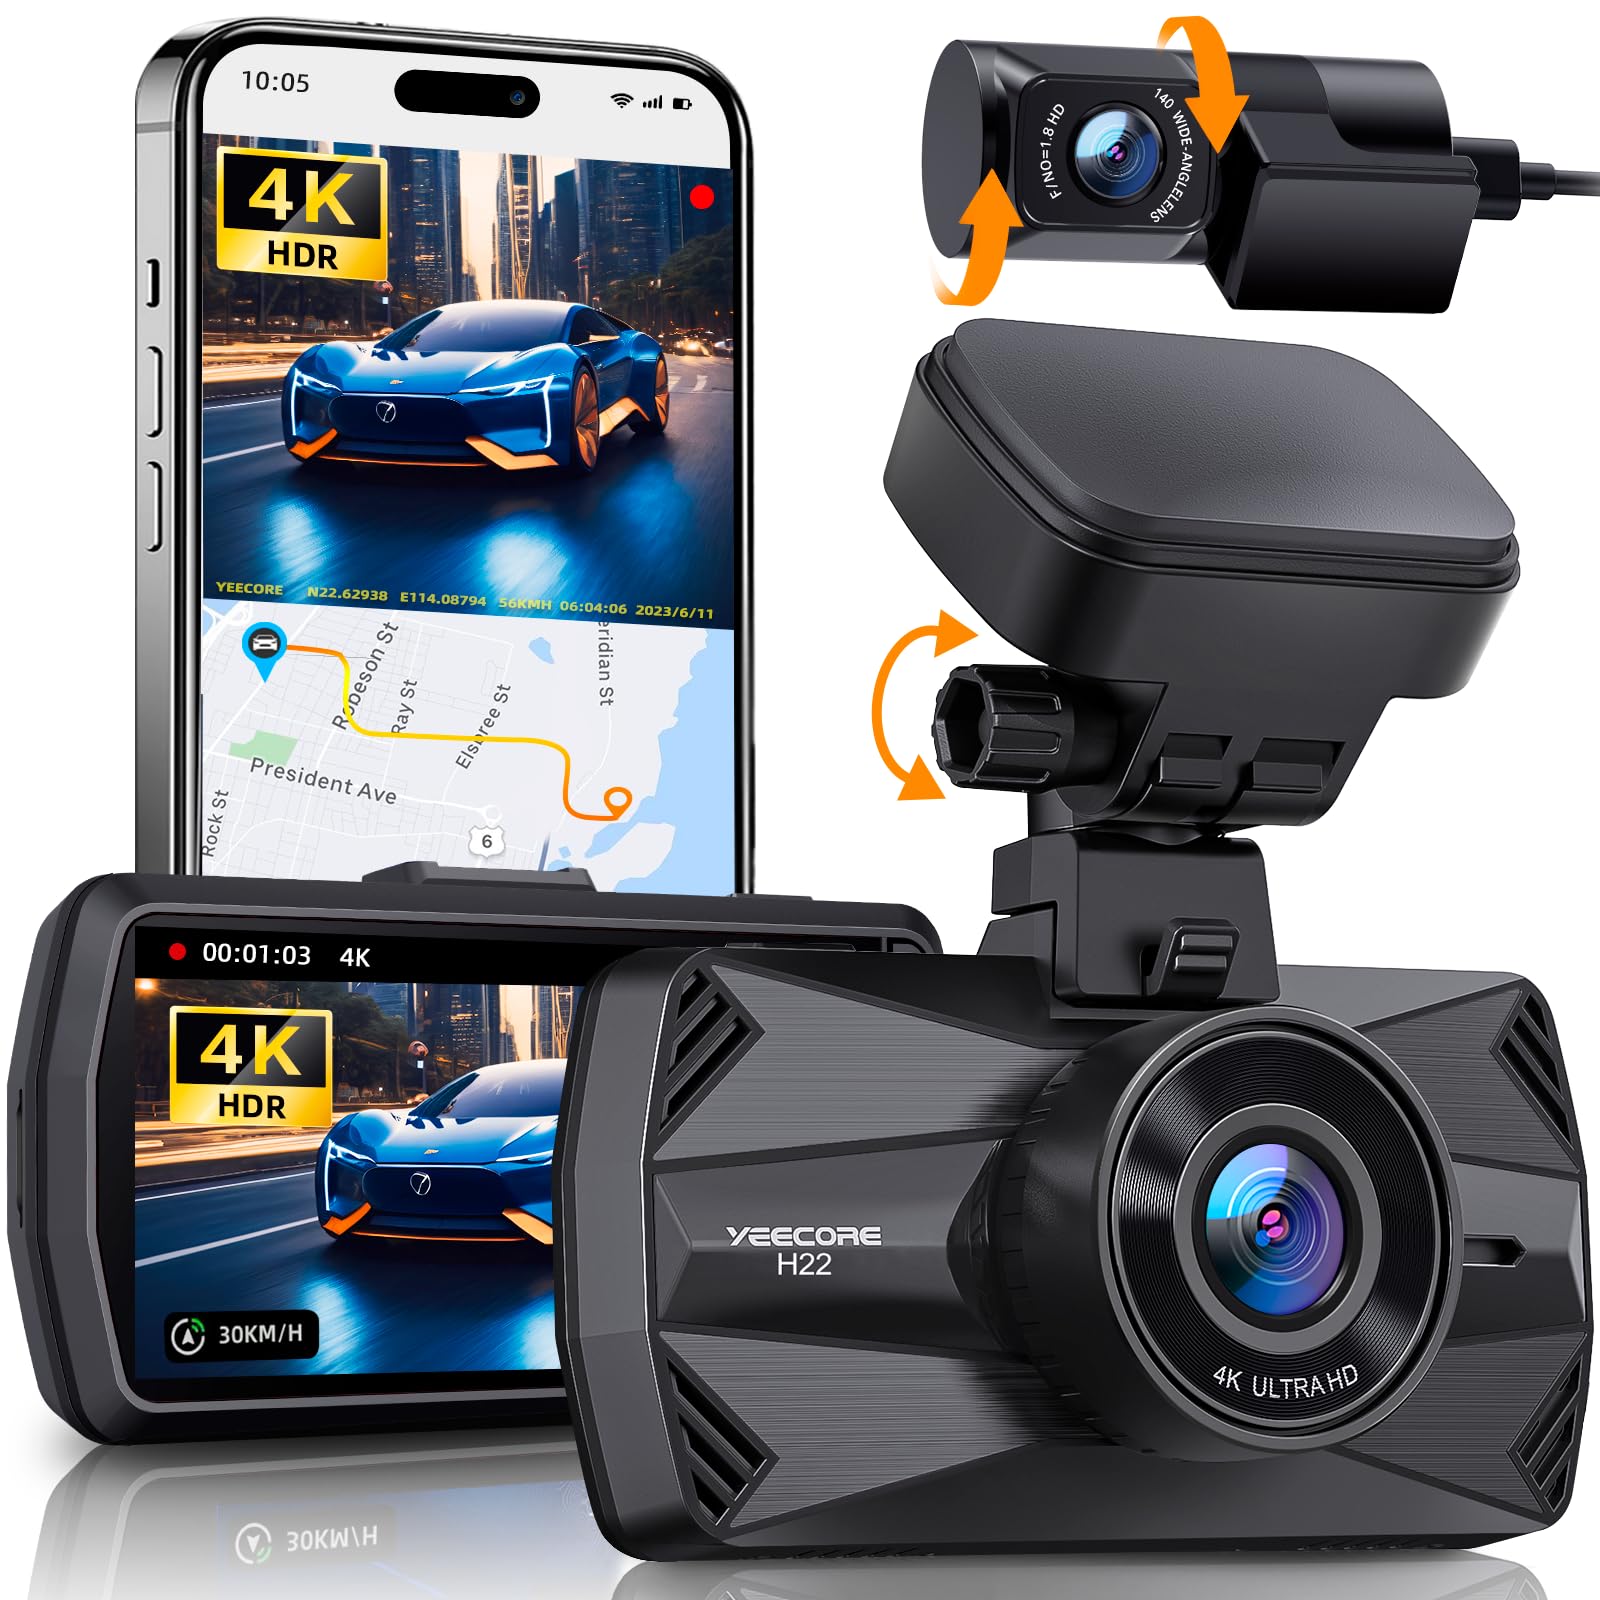 YEECORE Dual Dash Cam, Real 4K+1080P Front and Rear Dash Camera, Built-in WiFi GPS, 3" IPS Screen, HDR Night Vision, 24H Parking Monitor, 157°Wide Angle Dash Camera for Cars, Loop Recording (H22)